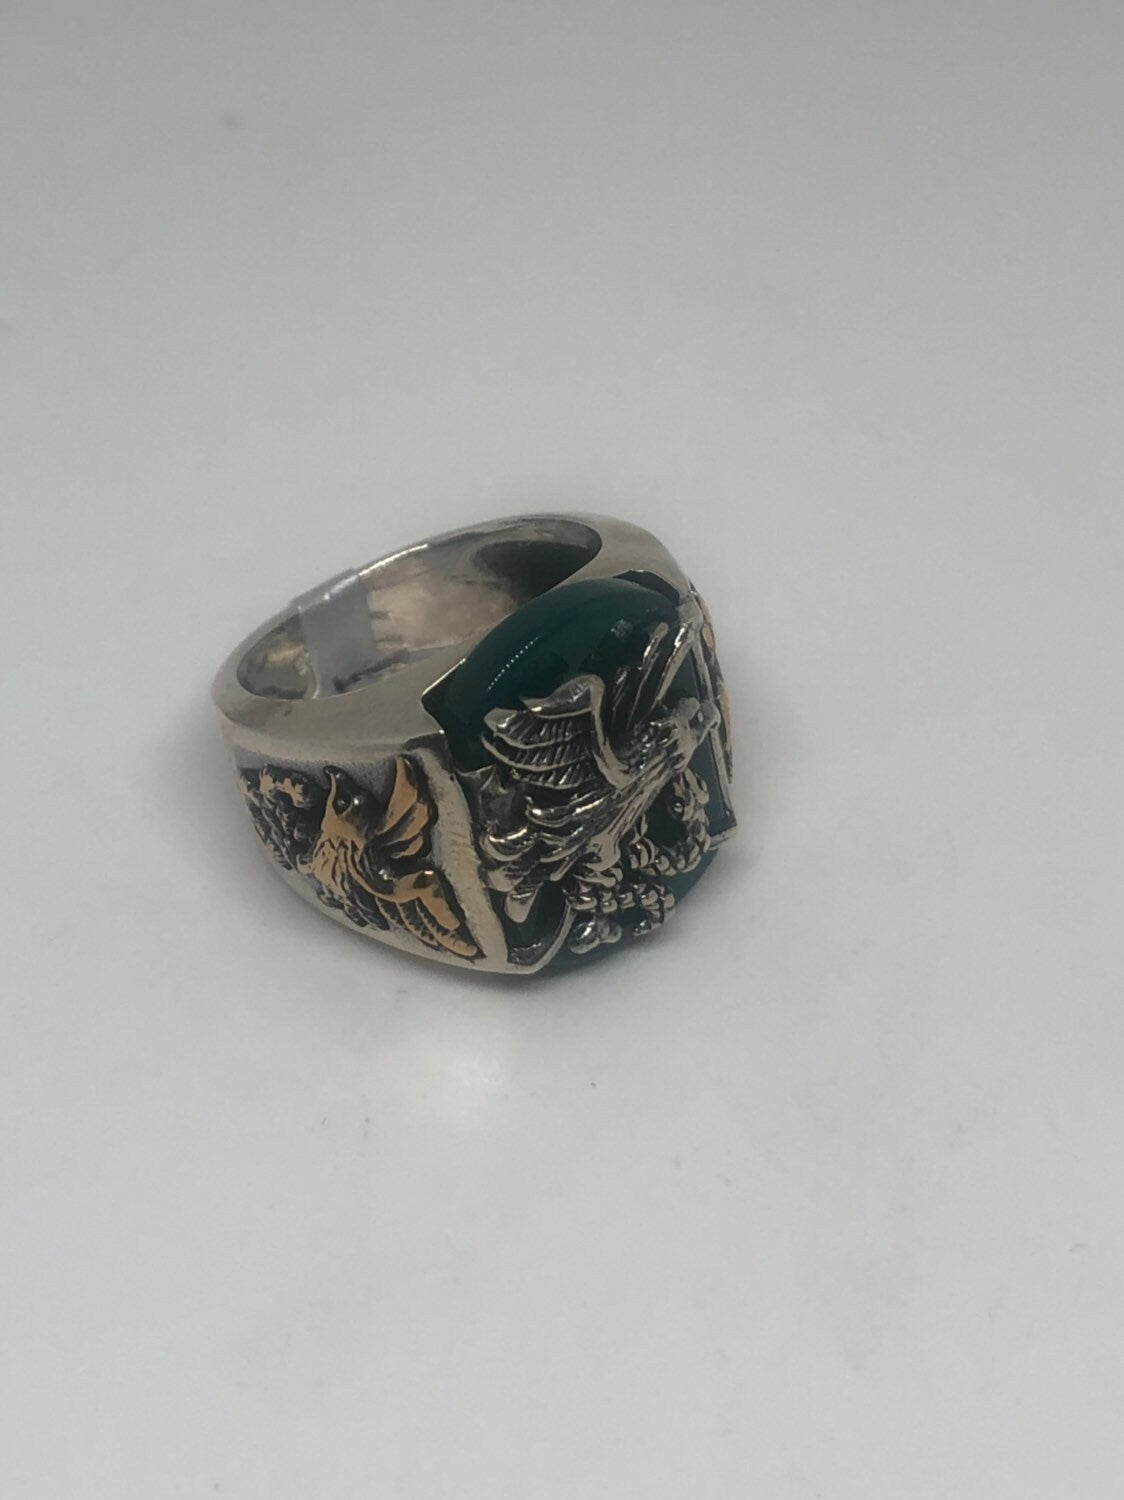 Vintage Green Onyx Eagle with Snake 925 Sterling Silver Ring